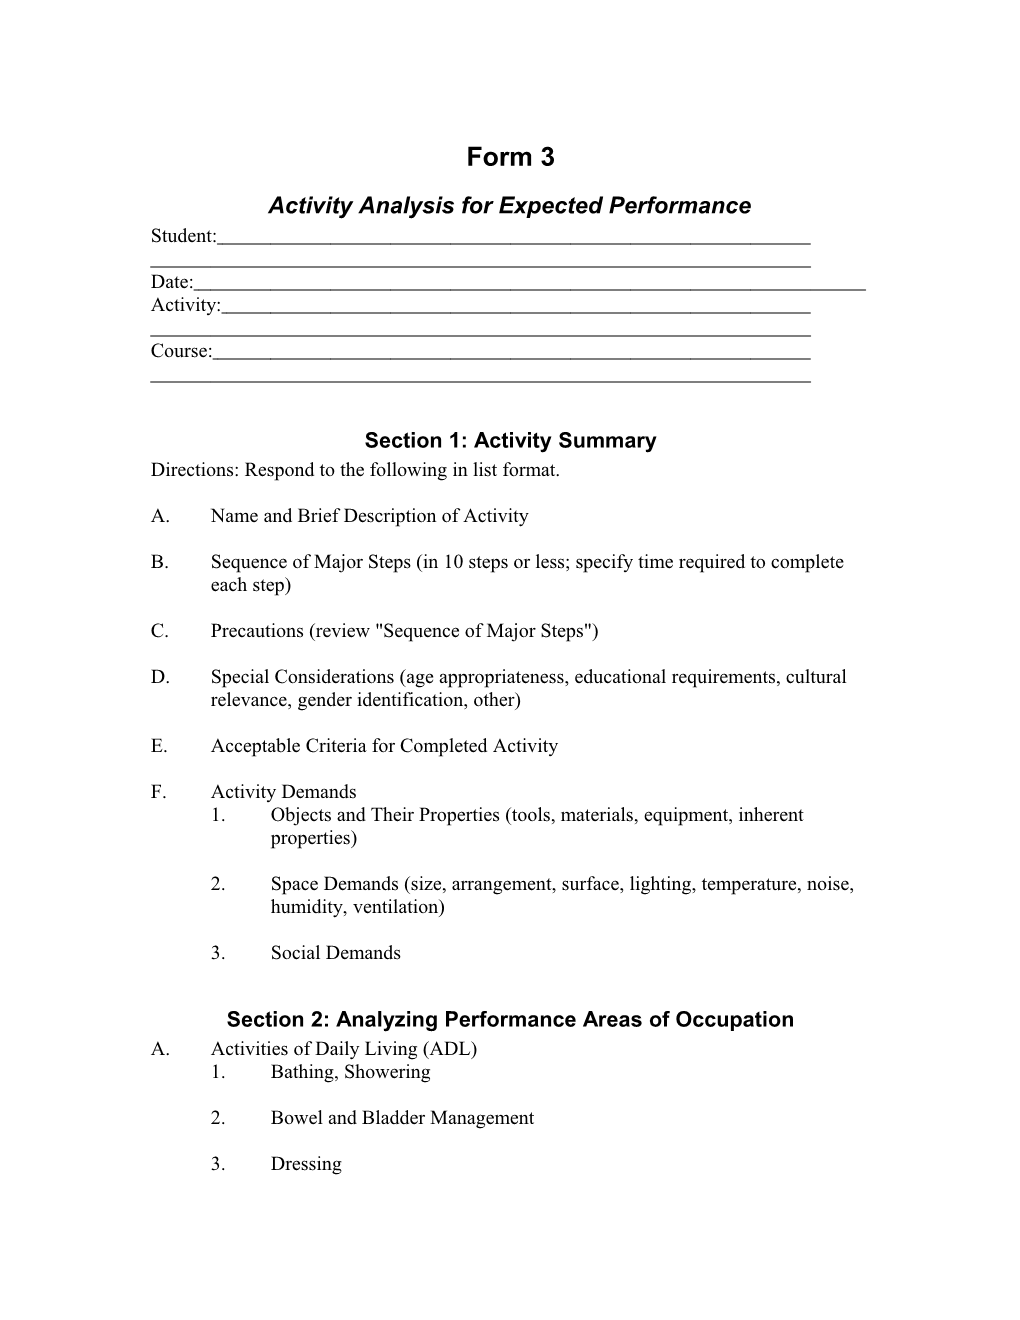 Activity Analysis for Expected Performance